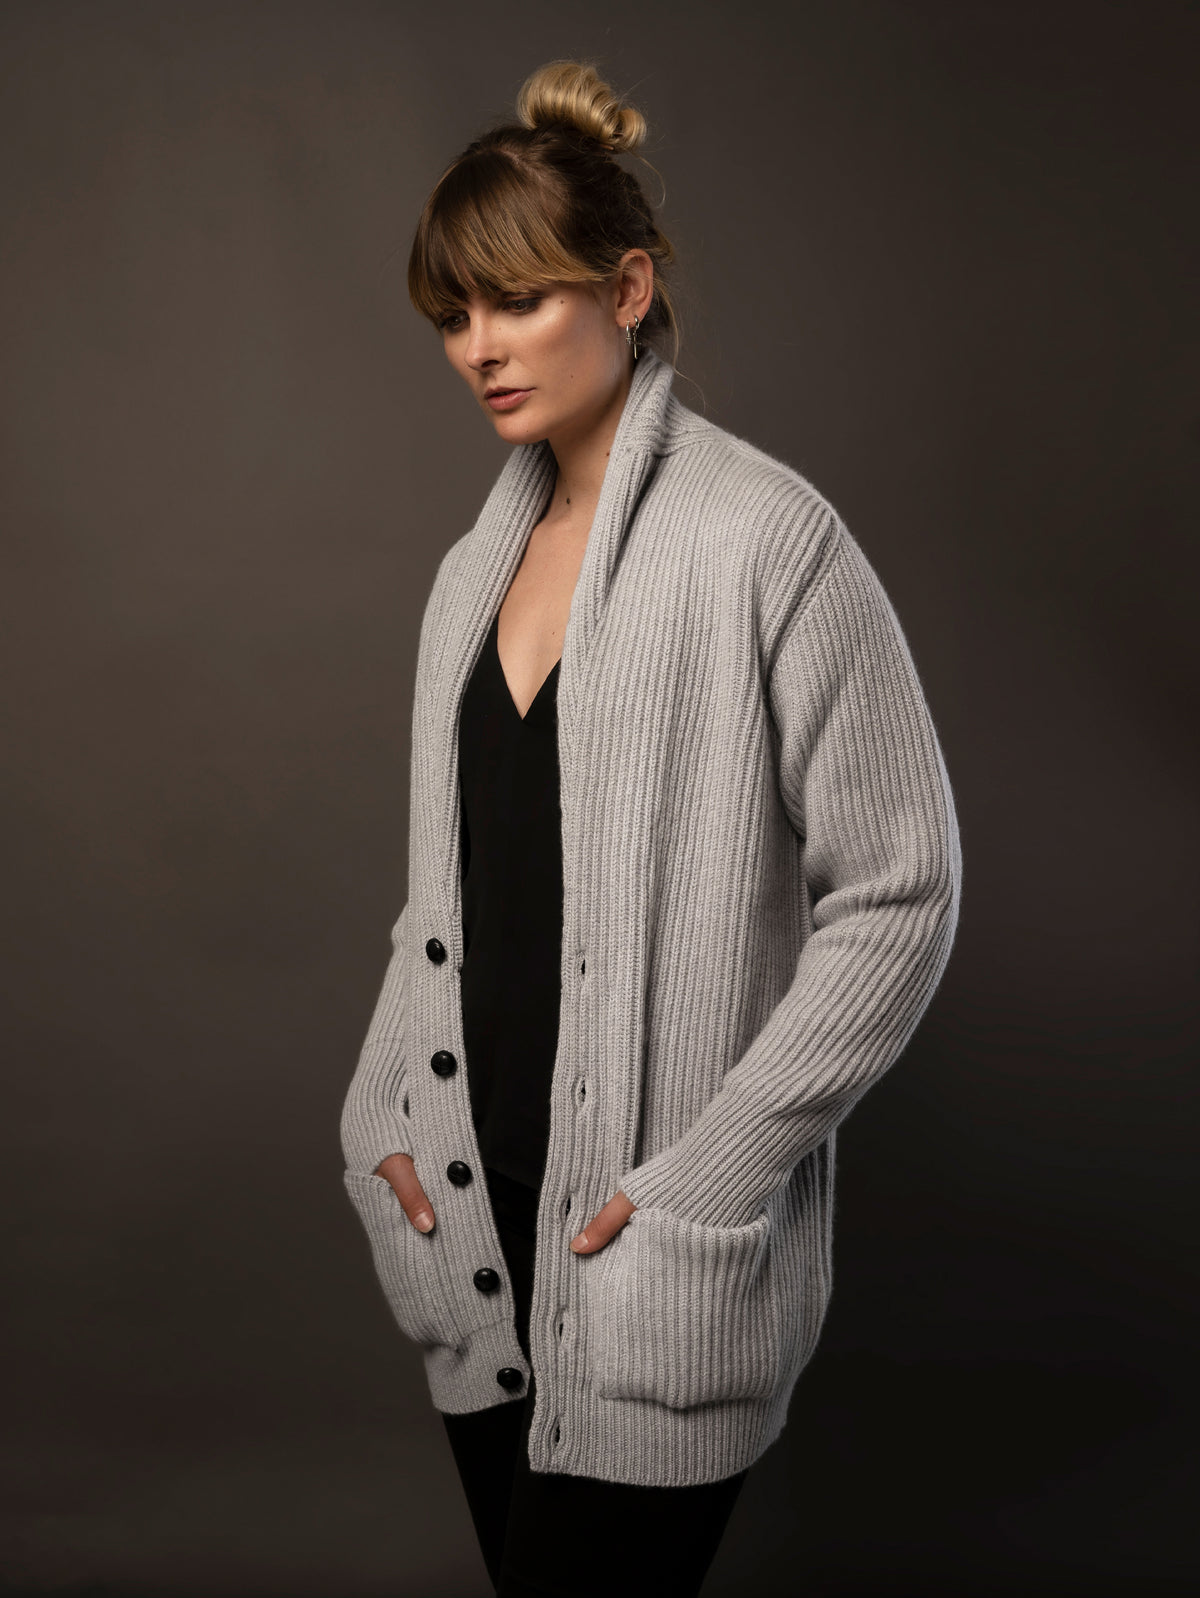 Ladies Cashmere Shawl Cardigan in Light Grey. 100% cashmere handmade under the Royal Warrant in the UK. This is Cashmere at it&#39;s finest. 